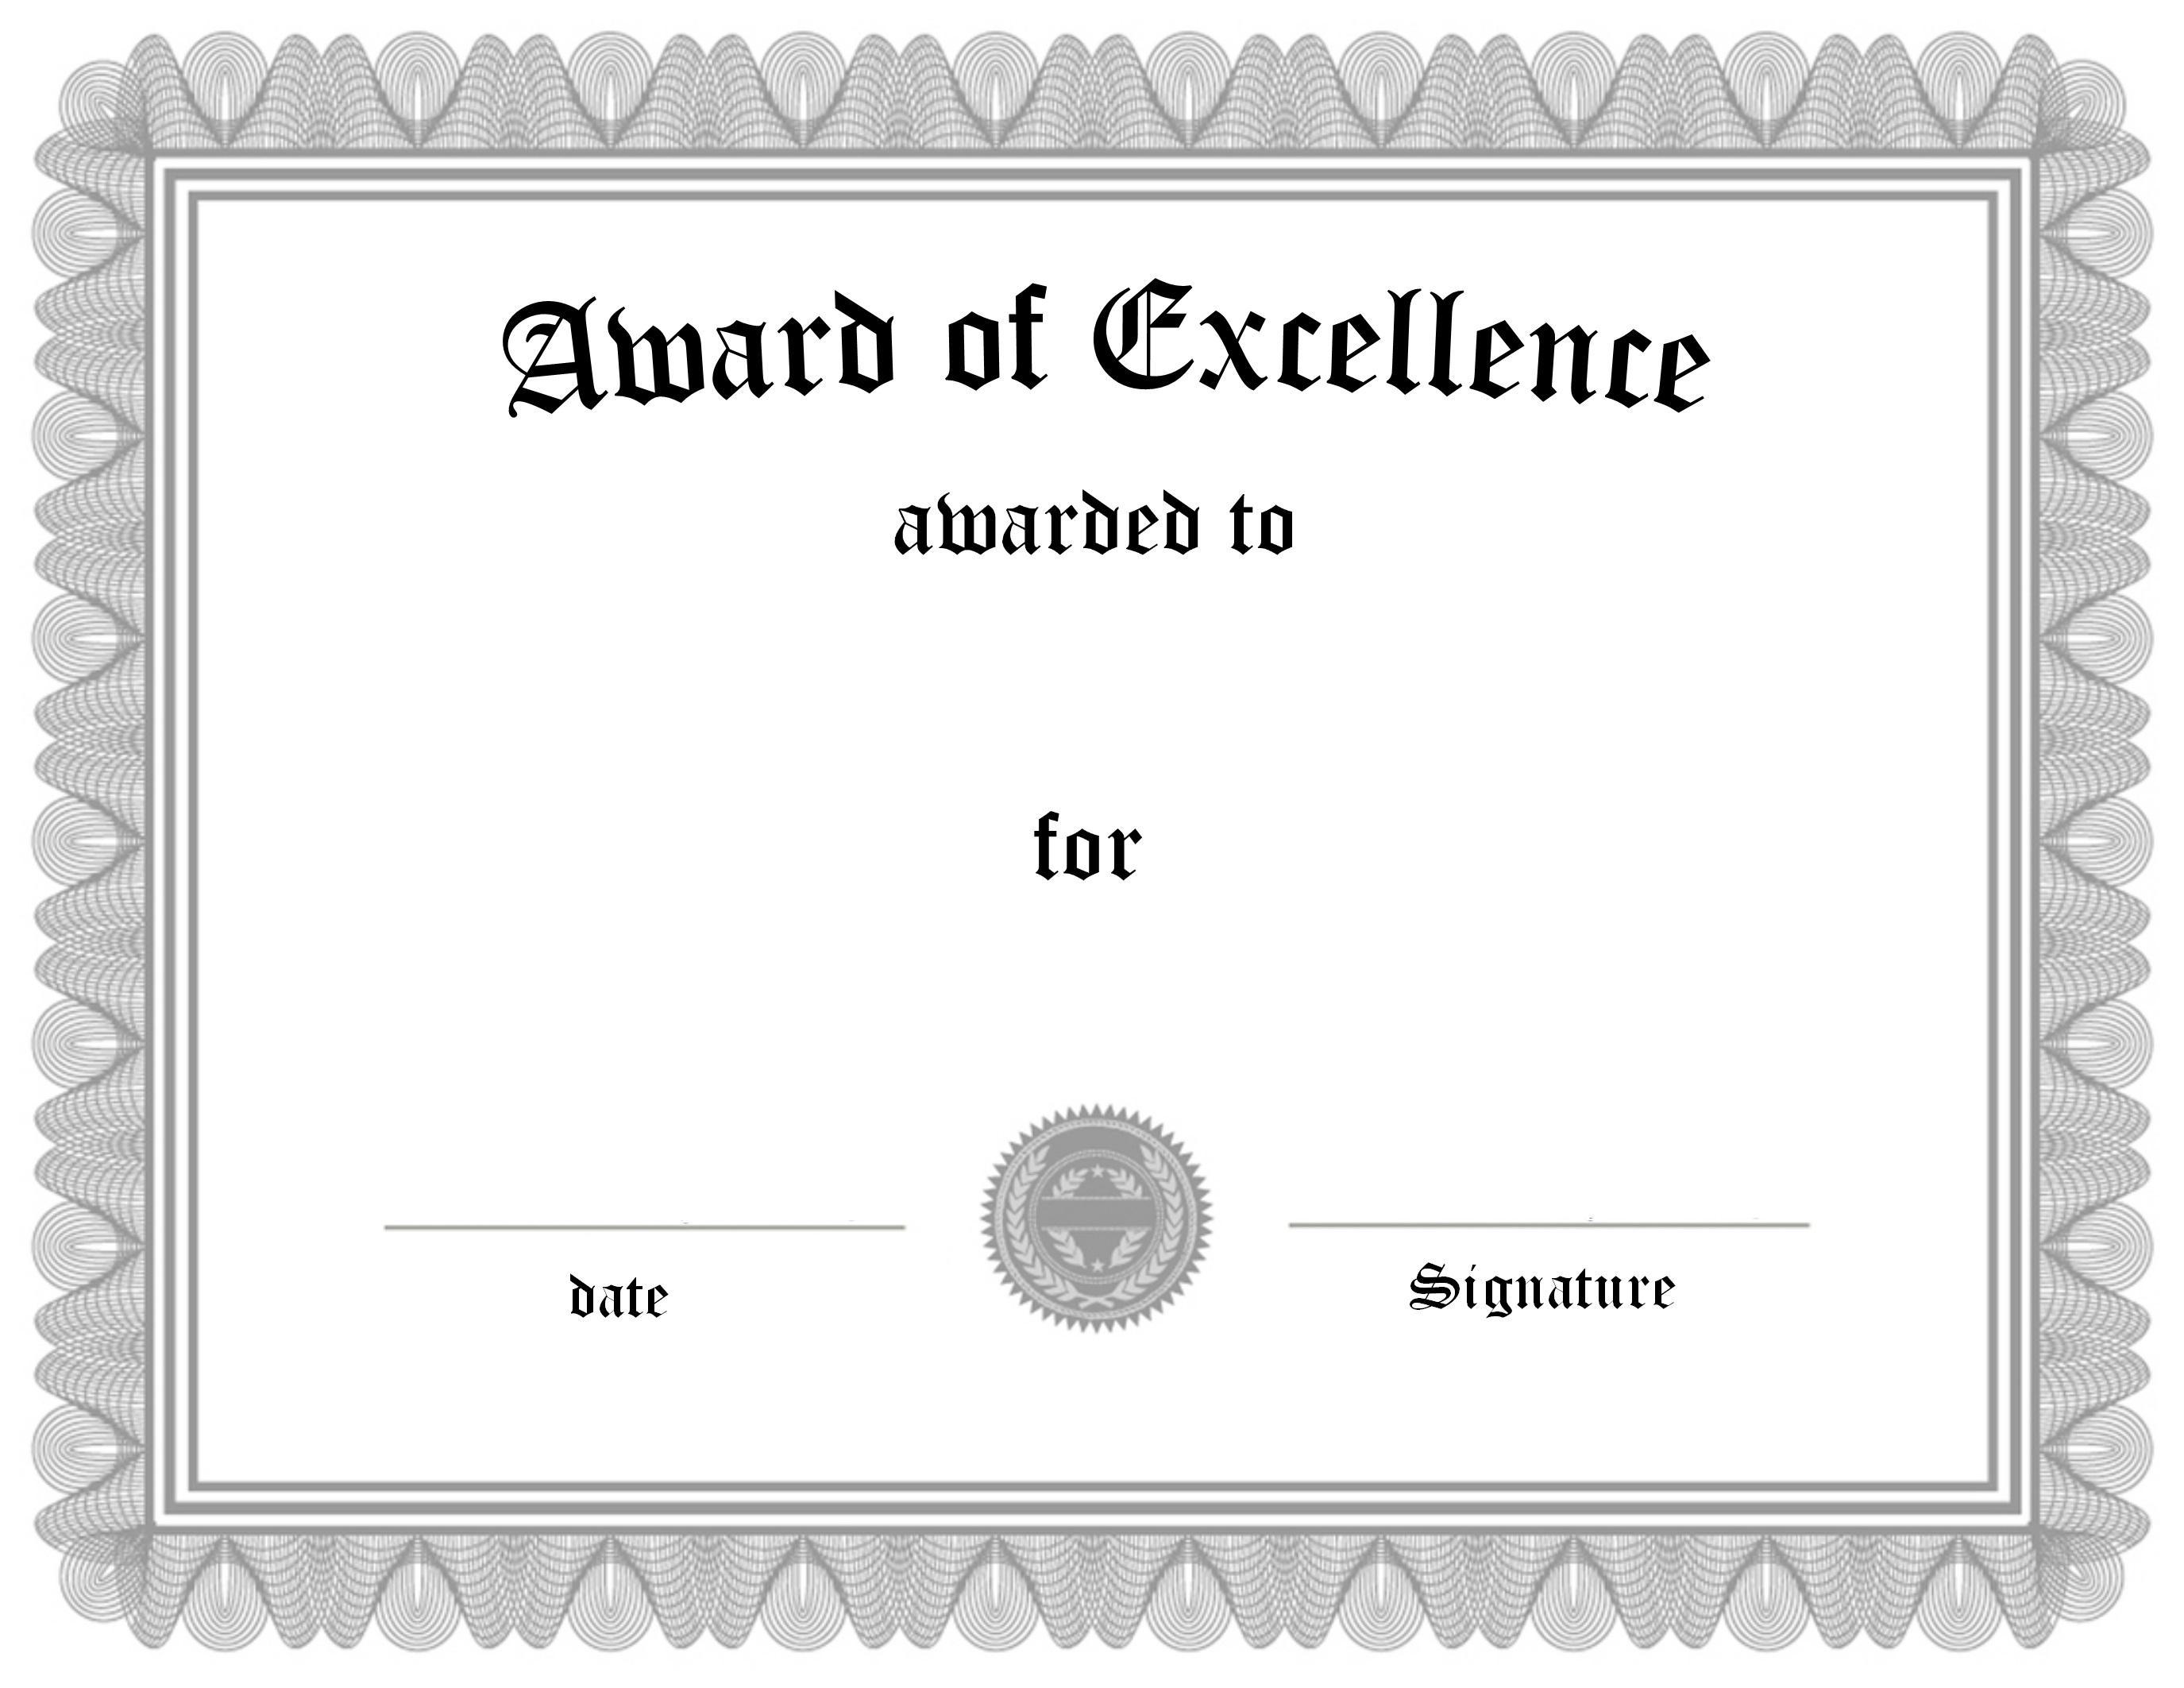 certificate-templates-award-of-excellence-template-sample-in-black With Regard To Award Of Excellence Certificate Template